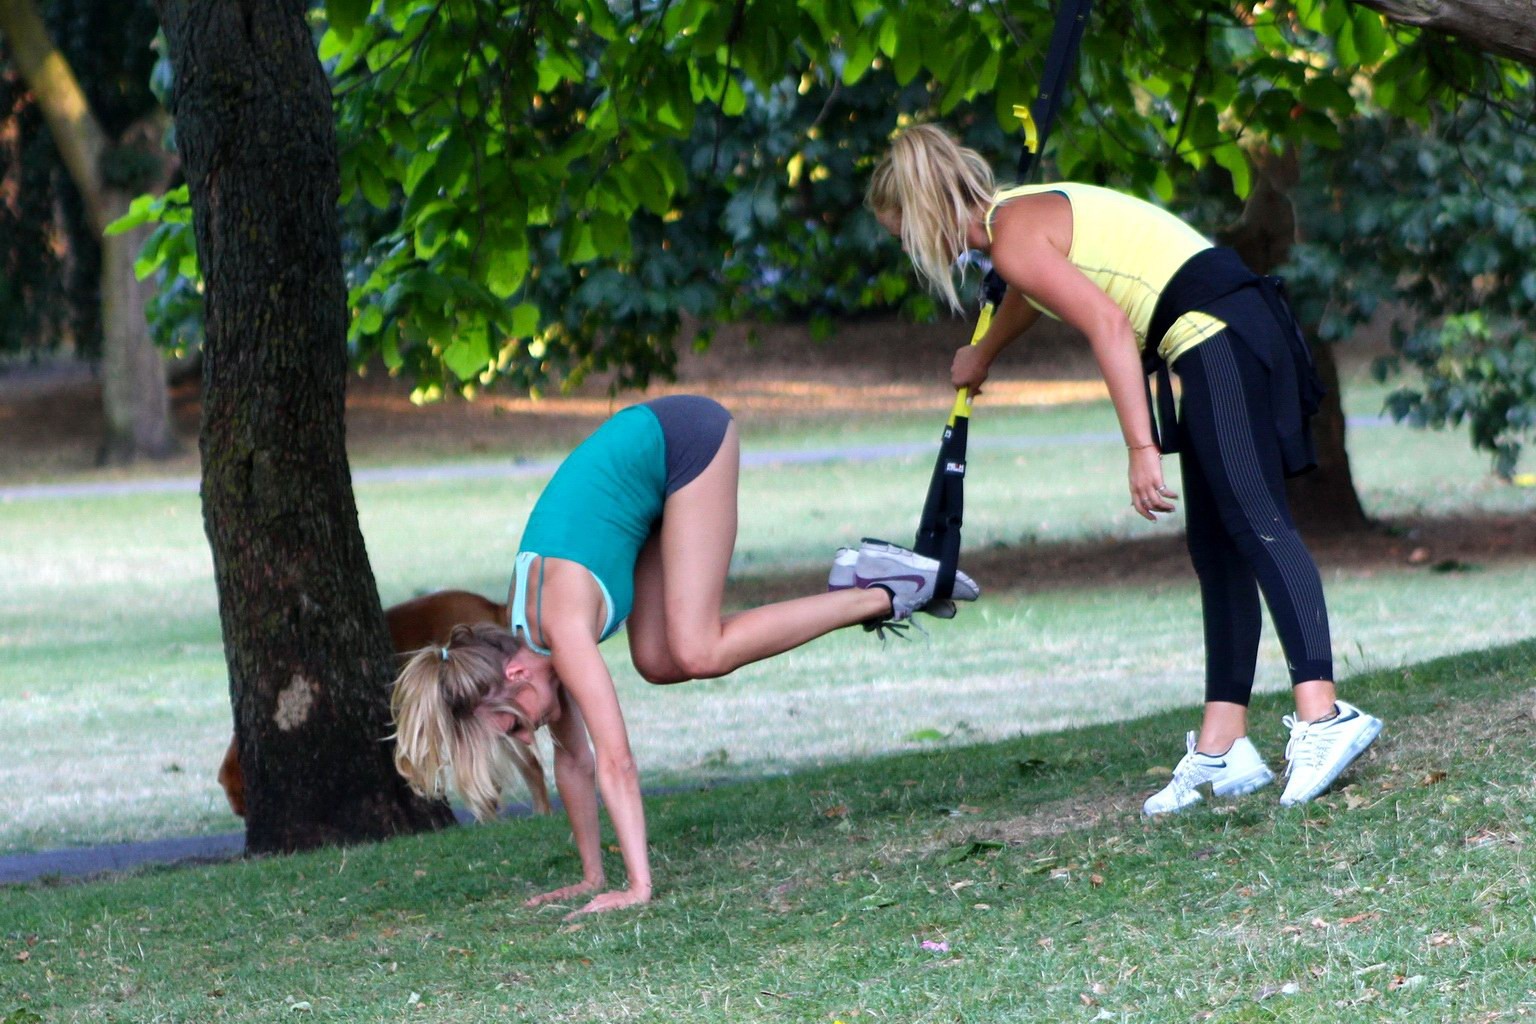 Kimberley Garner working out in a park #75153017